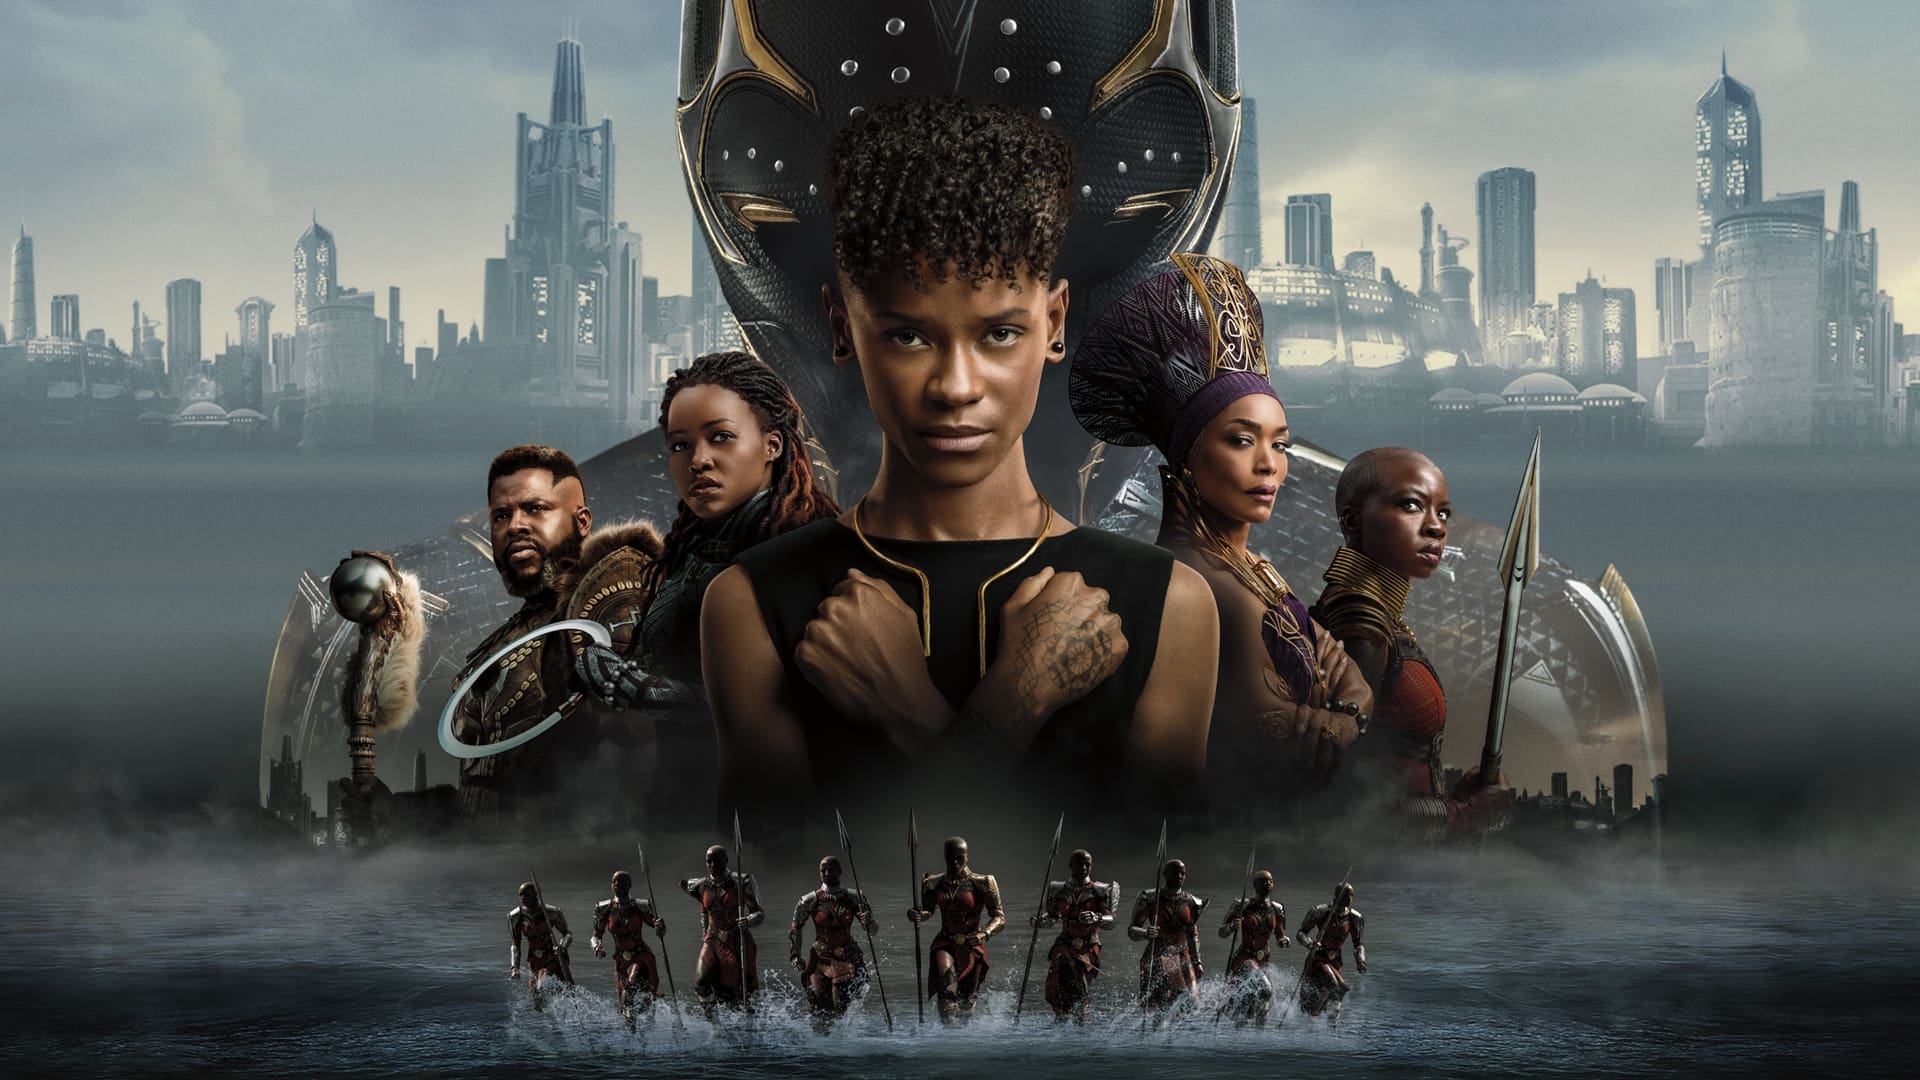 ‘Black Panther: Wakanda Forever’ grosses $330 million in its opening weekend